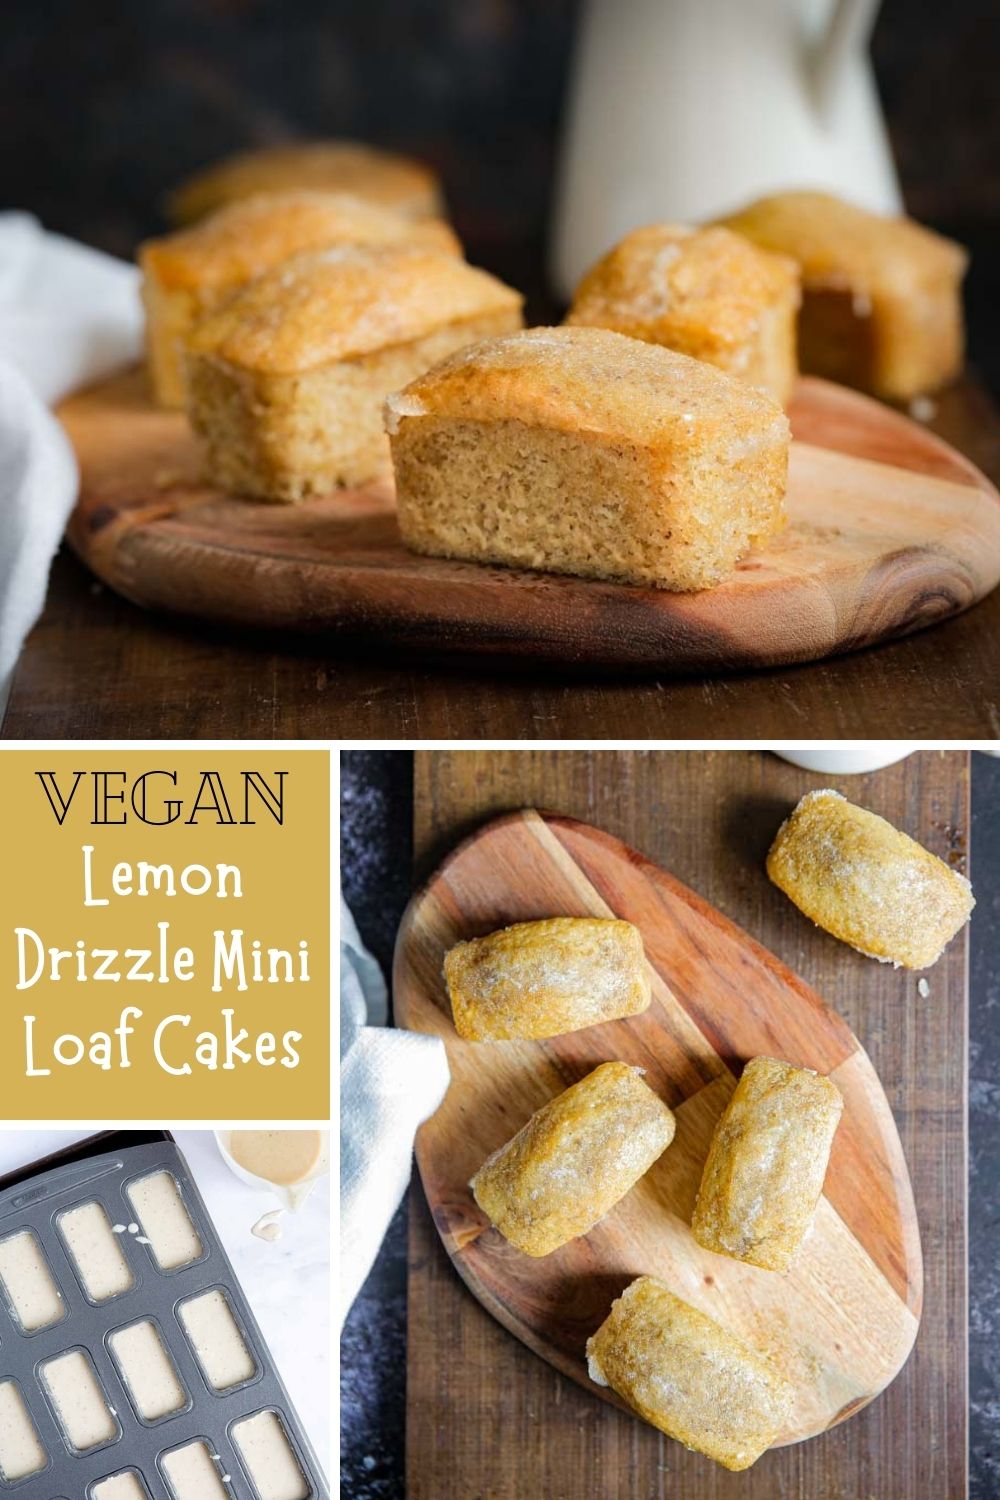 Dinky little vegan lemon drizzle mini loaf cakes. Full of zesty flavour with a sticky sweet lemon drizzle. Perfect lunchbox, picnic or because it's Tuesday sweet treats! #vegan #miniloafcakes #lemondrizzle #lemondrizzlecake #veganbaking #eggfreebaking #eggfreecake #dairyfree